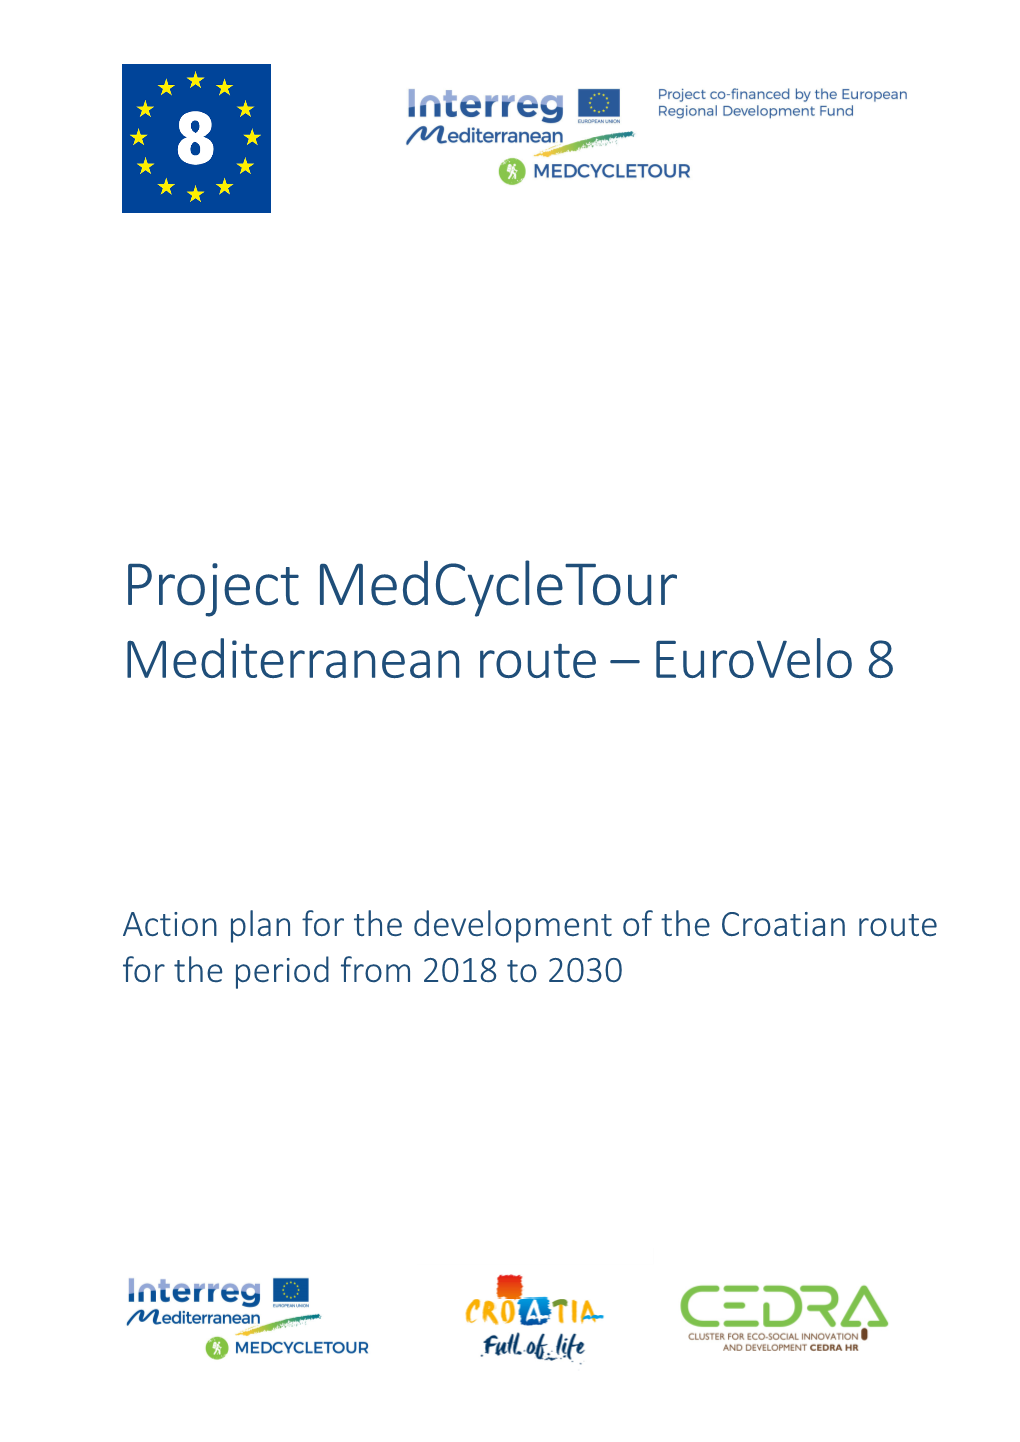 Pdf 16.66 MB Action Plan for the Development of the Croatian Route